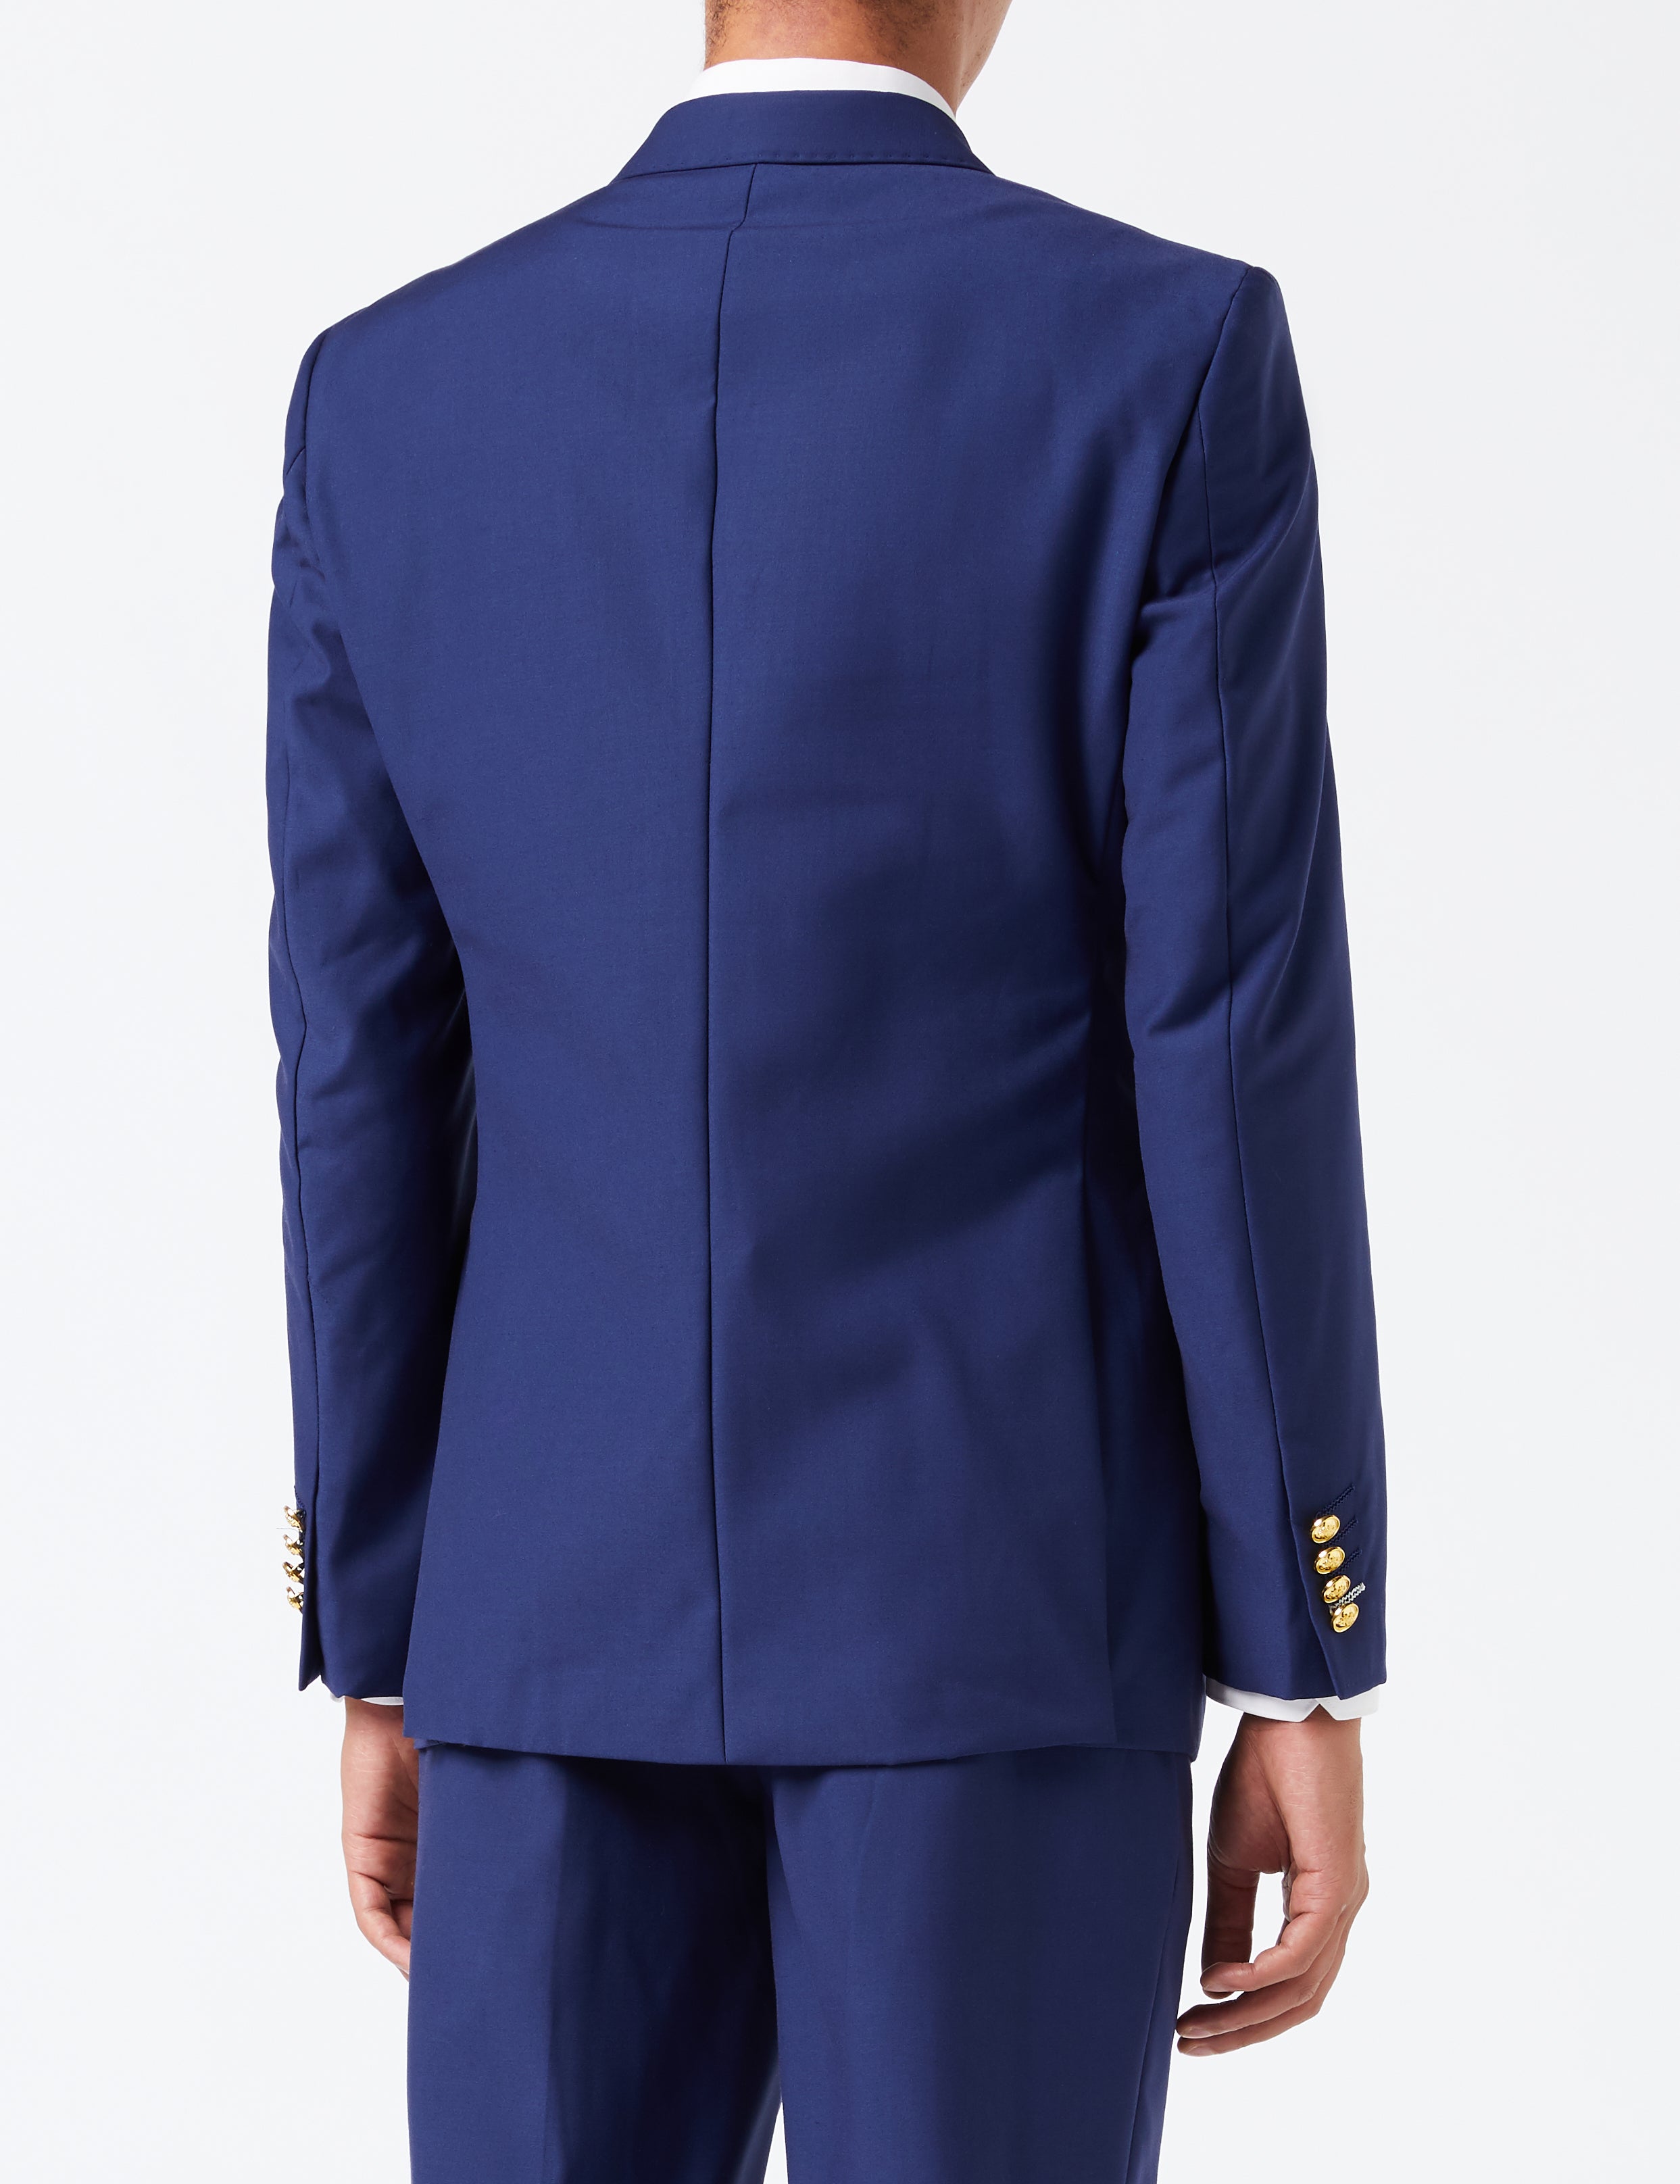 NAVY DOUBLE BREASTED GOLD BUTTON SUIT